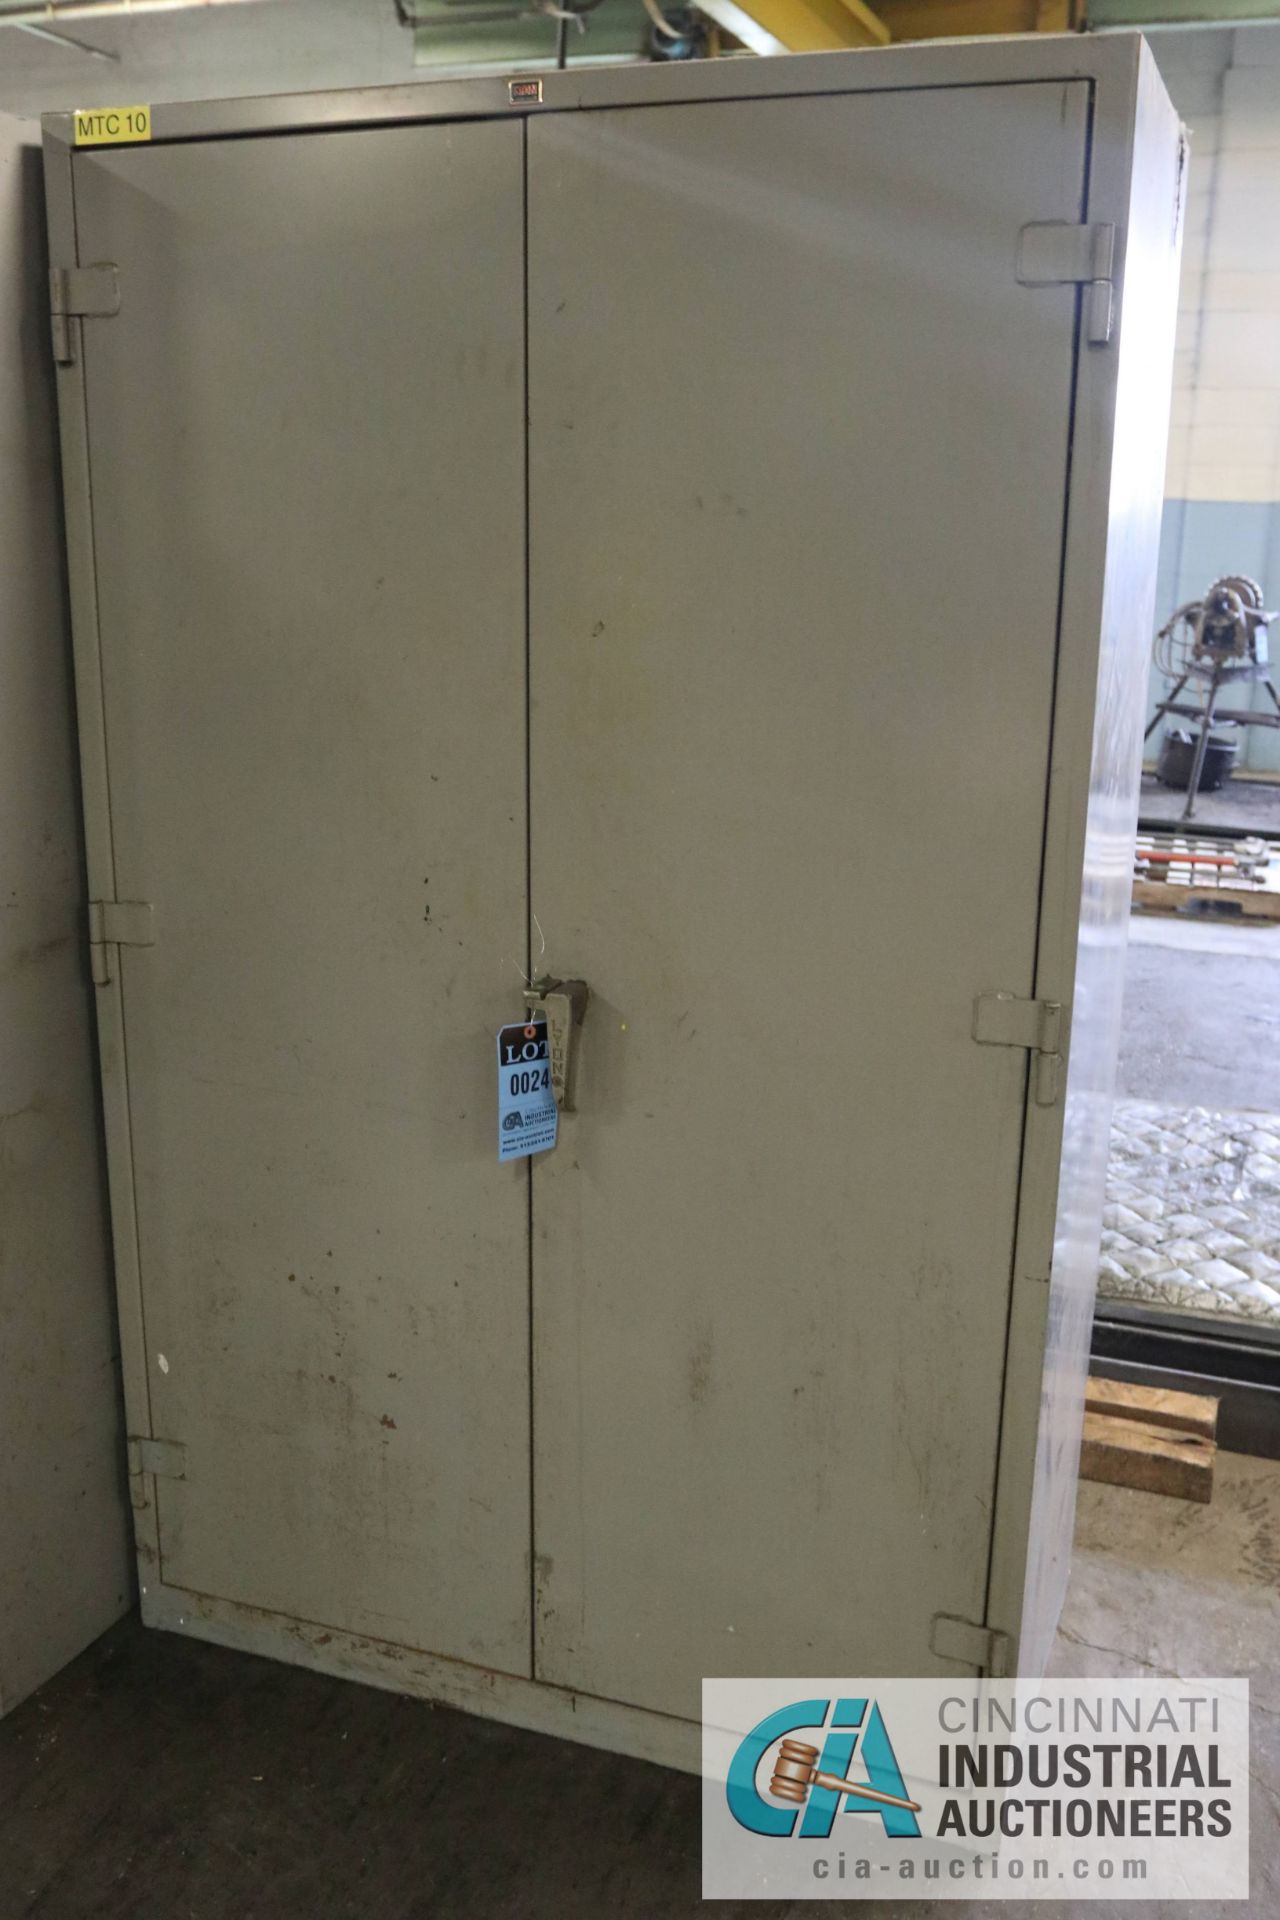 48" X 24" X 78" LYON CABINET W/ SHELVES - $10.00 Rigging Fee Due to Onsite Rigger - Located in